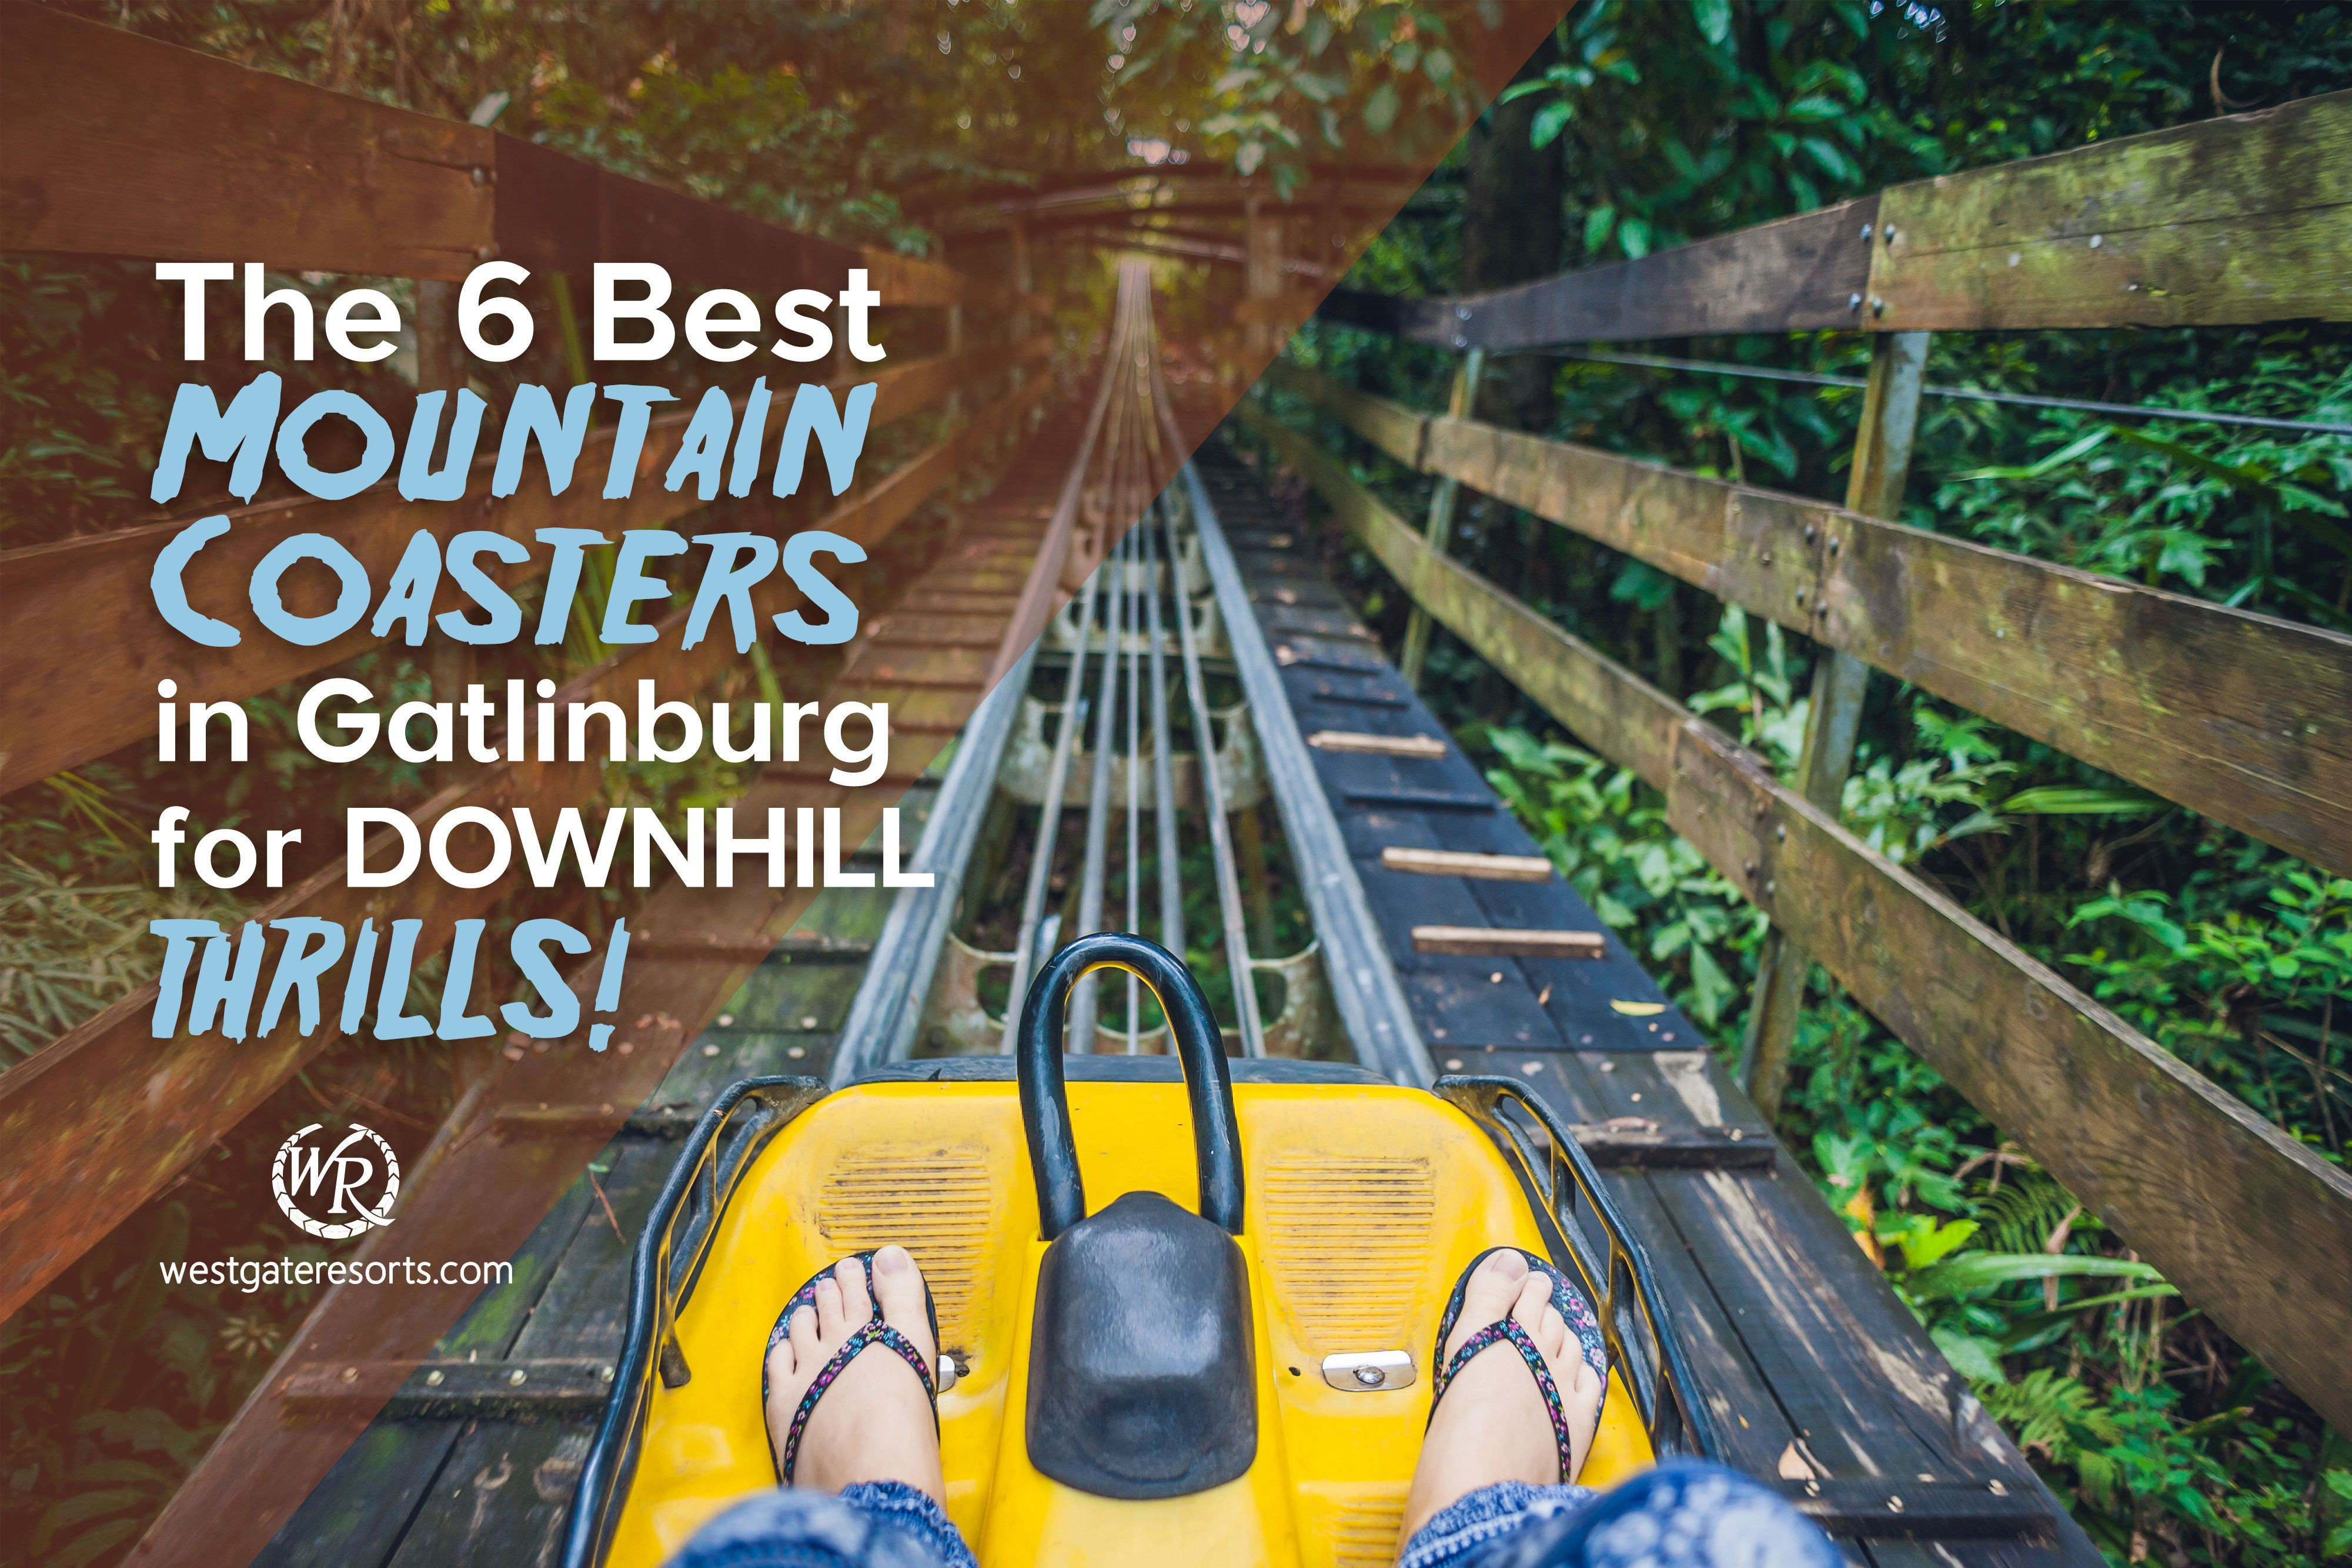 The 6 Best Mountain Coasters in Gatlinburg For Downhill Thrills!